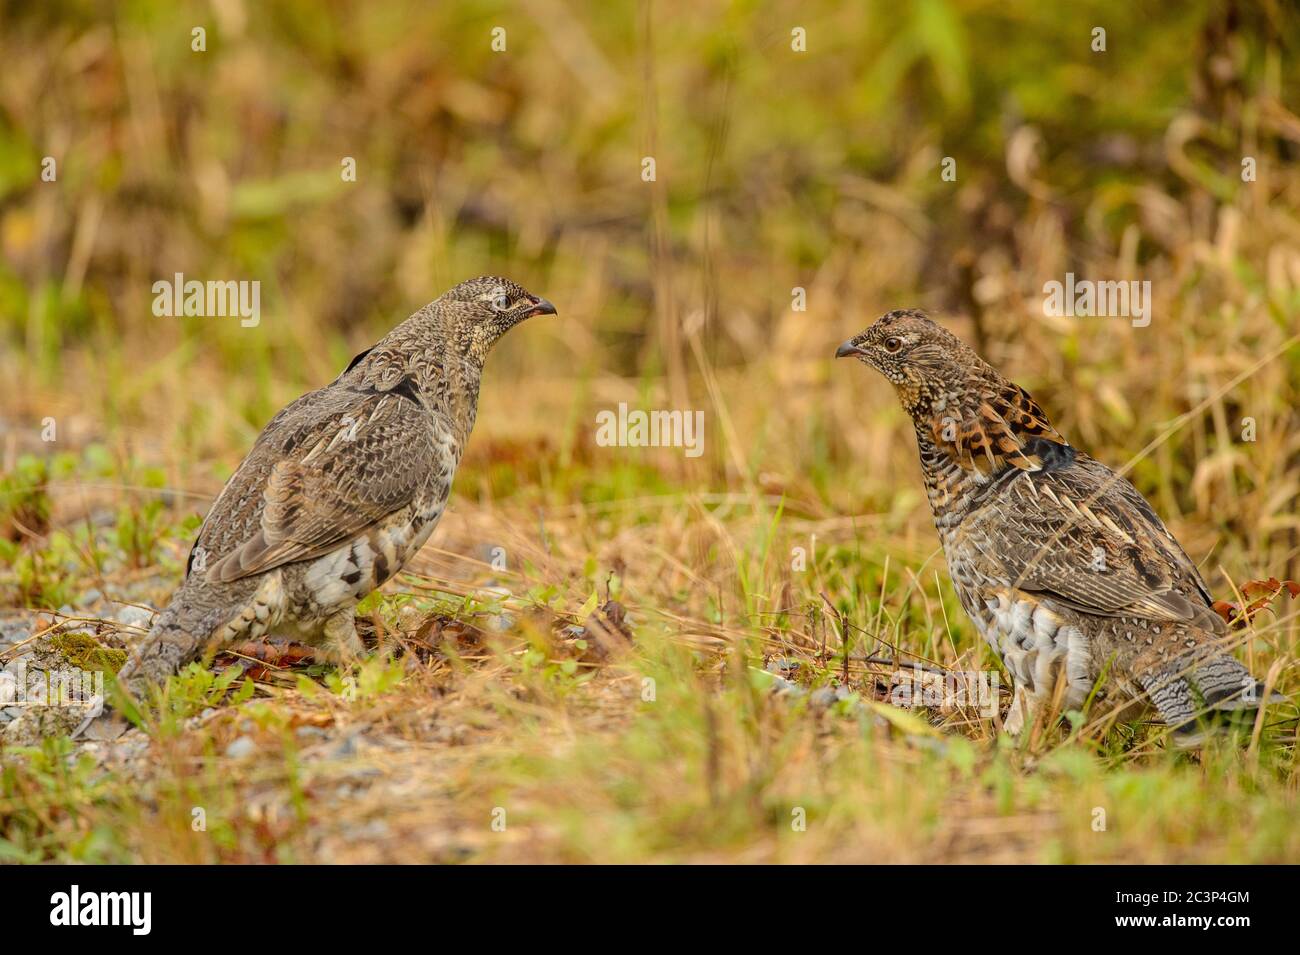 Ruffed grouse (Bonasa umbellus) Two individuals confronting one another in early autumn, Greater Sudbury, Ontario, Canada Stock Photo